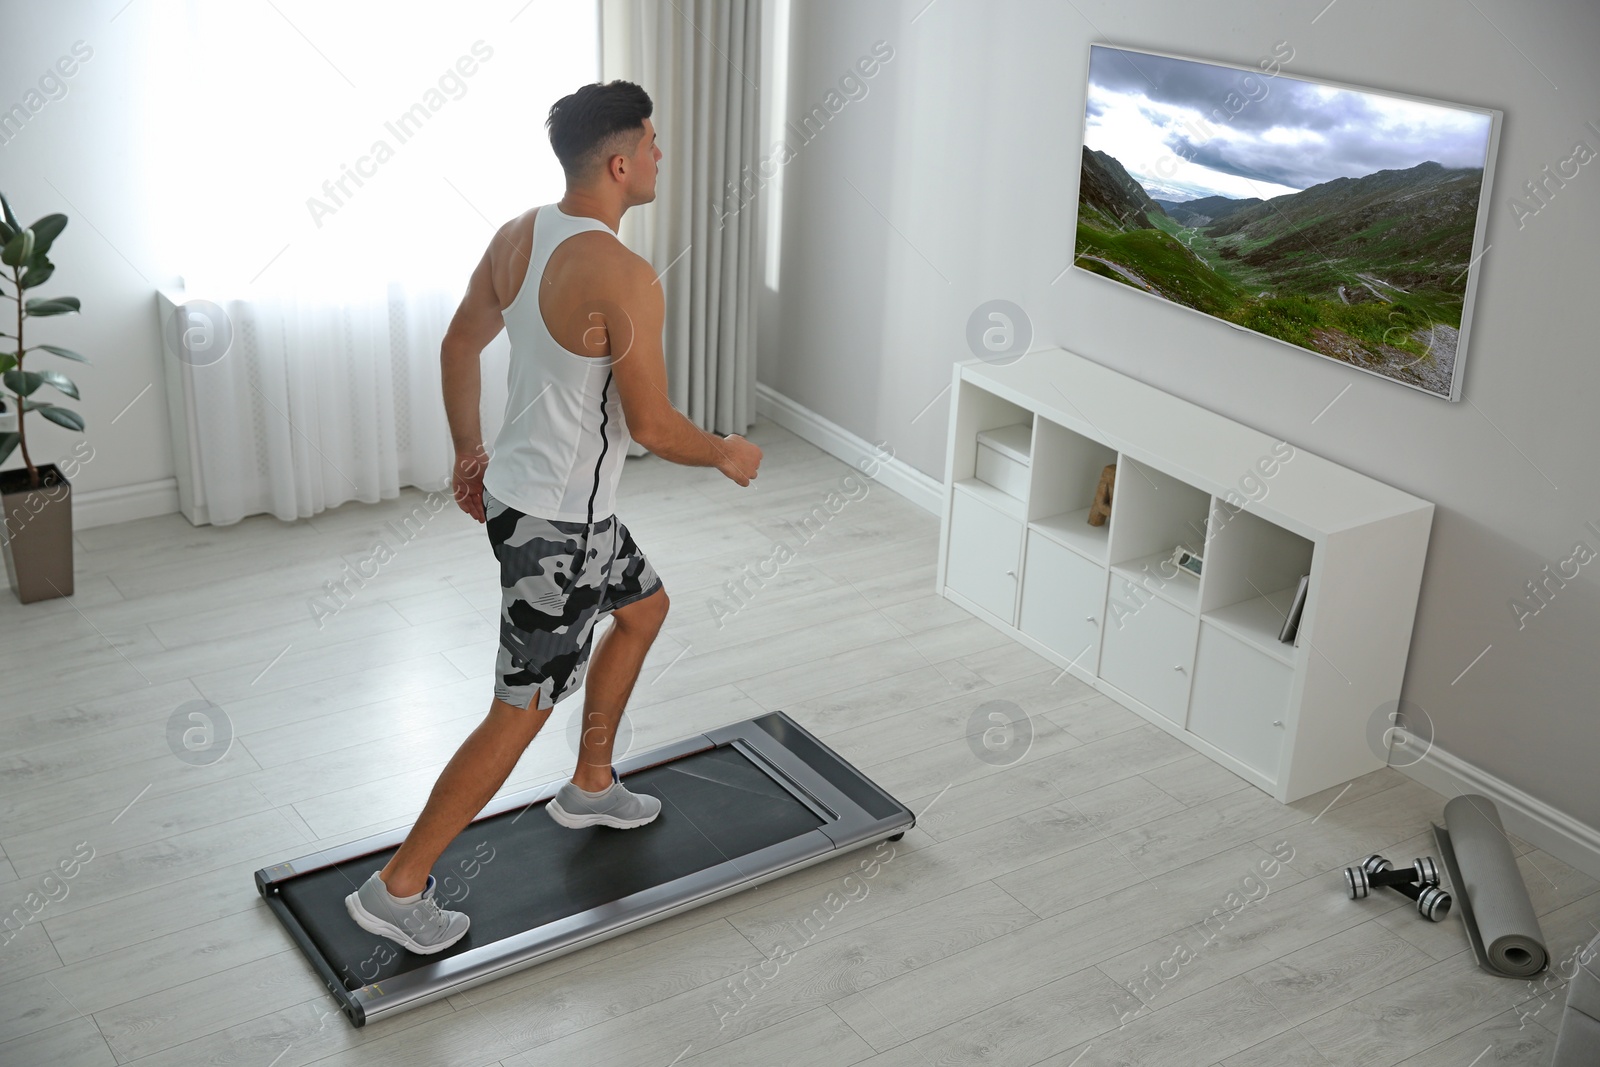 Image of Sporty man training on walking treadmill and watching TV at home